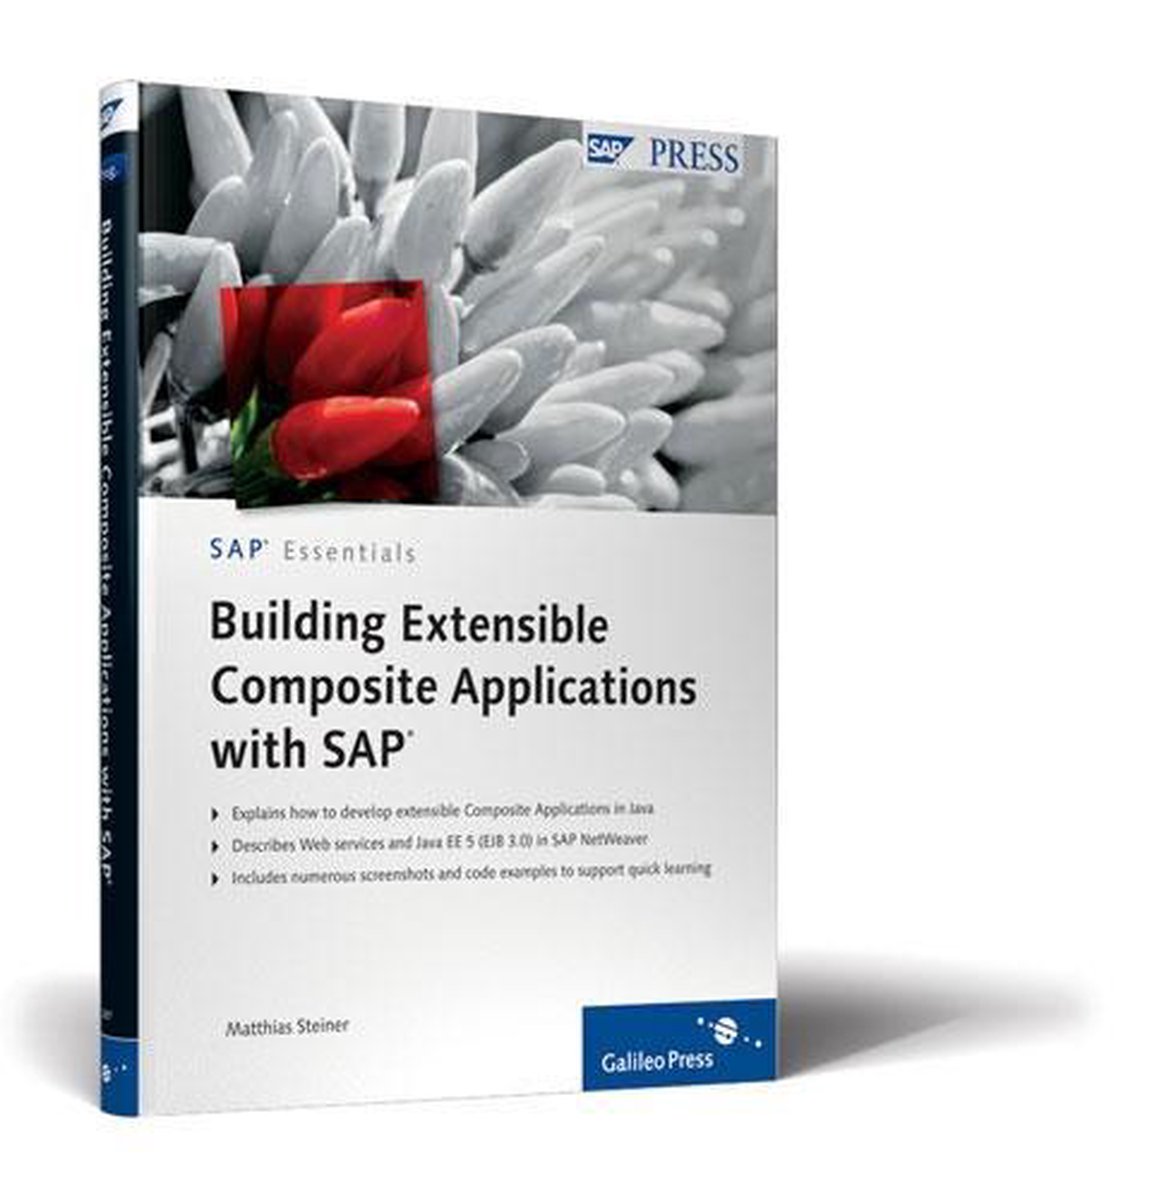 Building Extensible Composite Applications with SAP